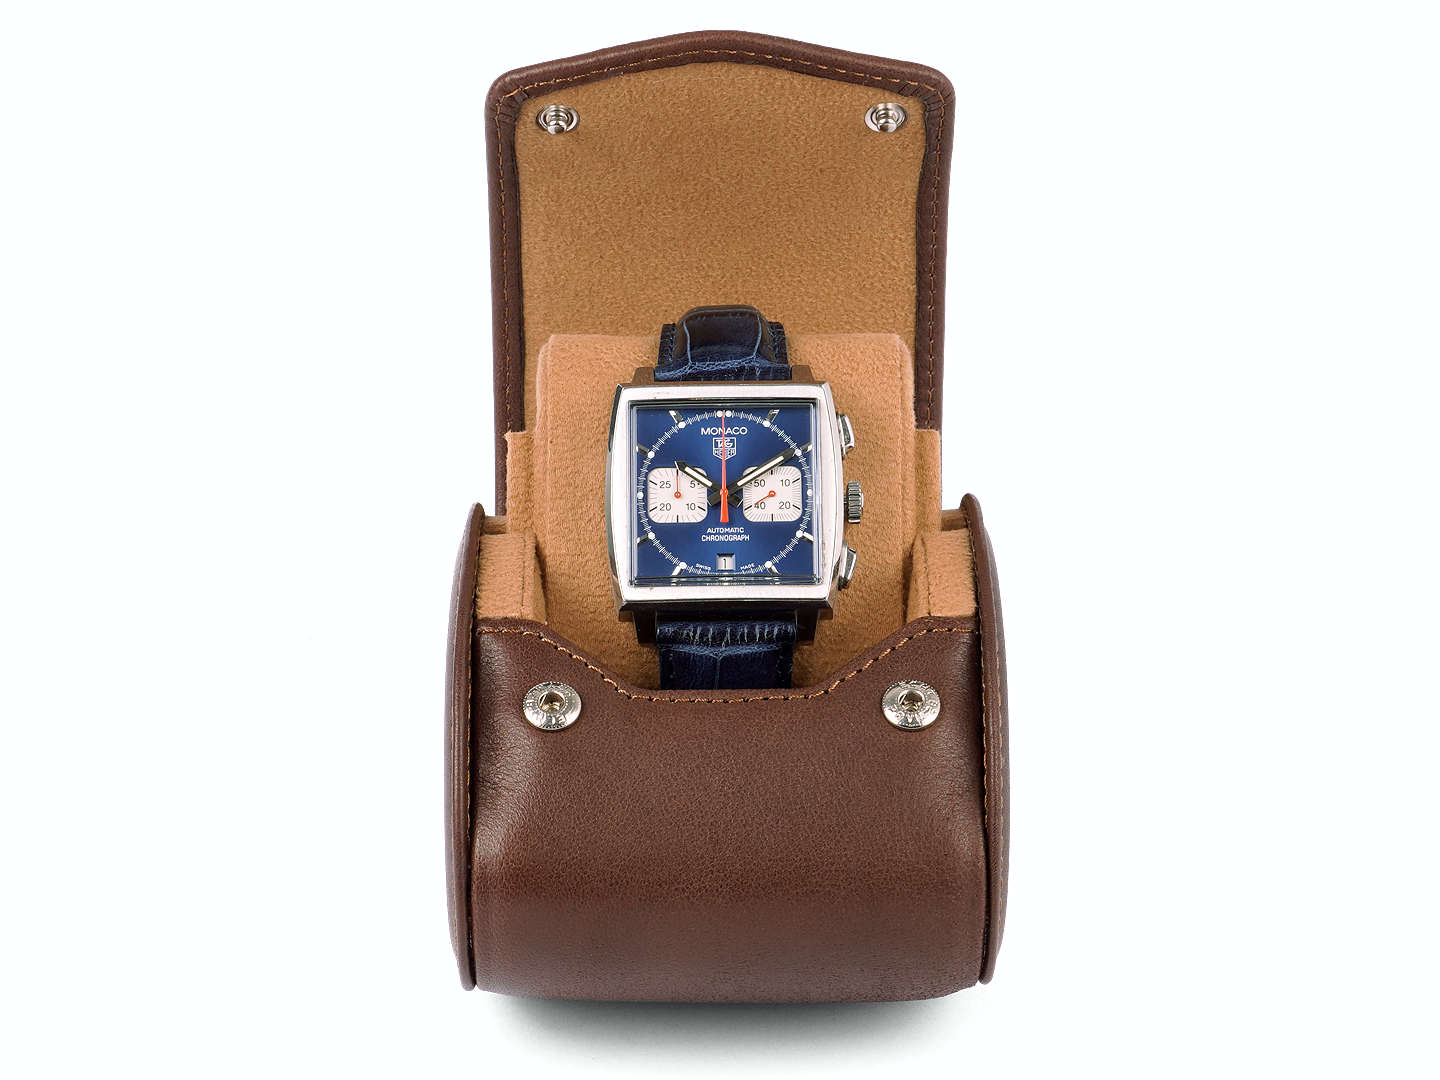 Watch case for 3 watches - Navy Blue - Vegetable Tanned Leather